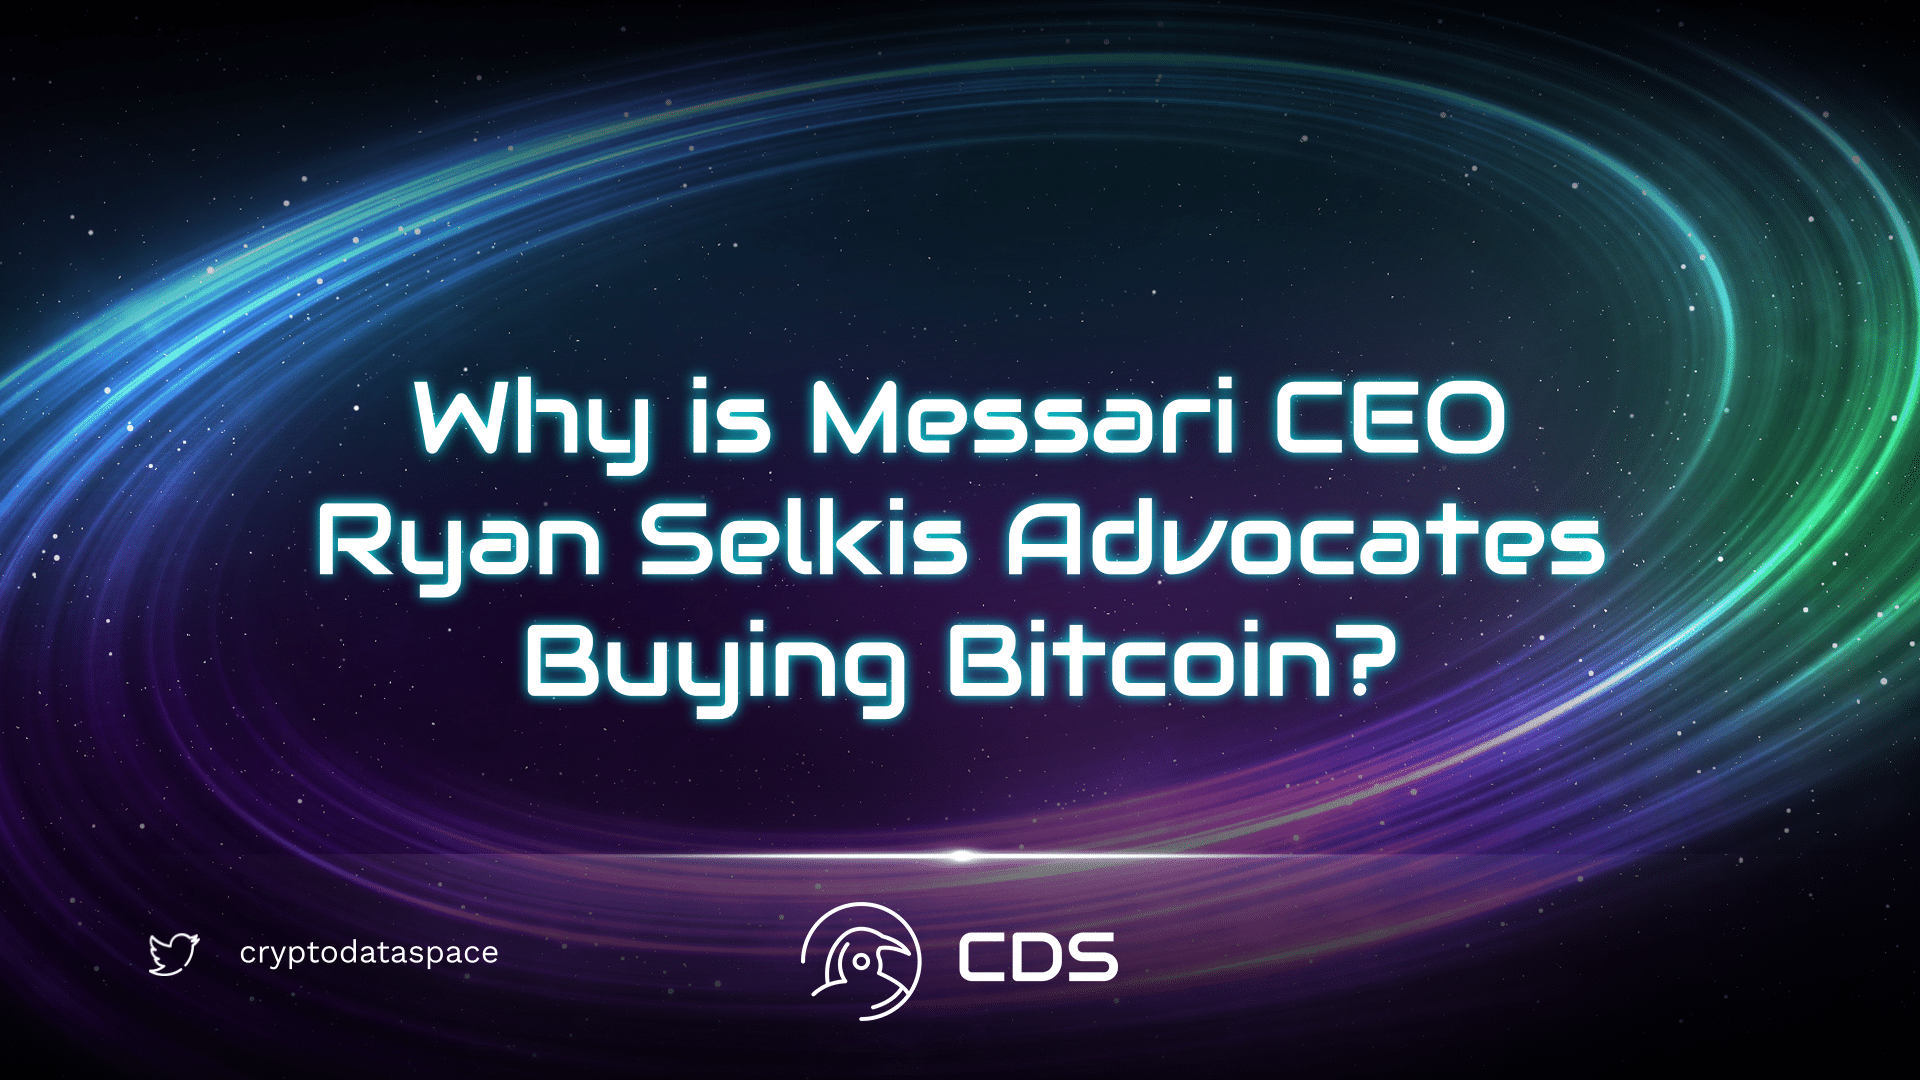 Why is Messari CEO Ryan Selkis Advocates Buying Bitcoin